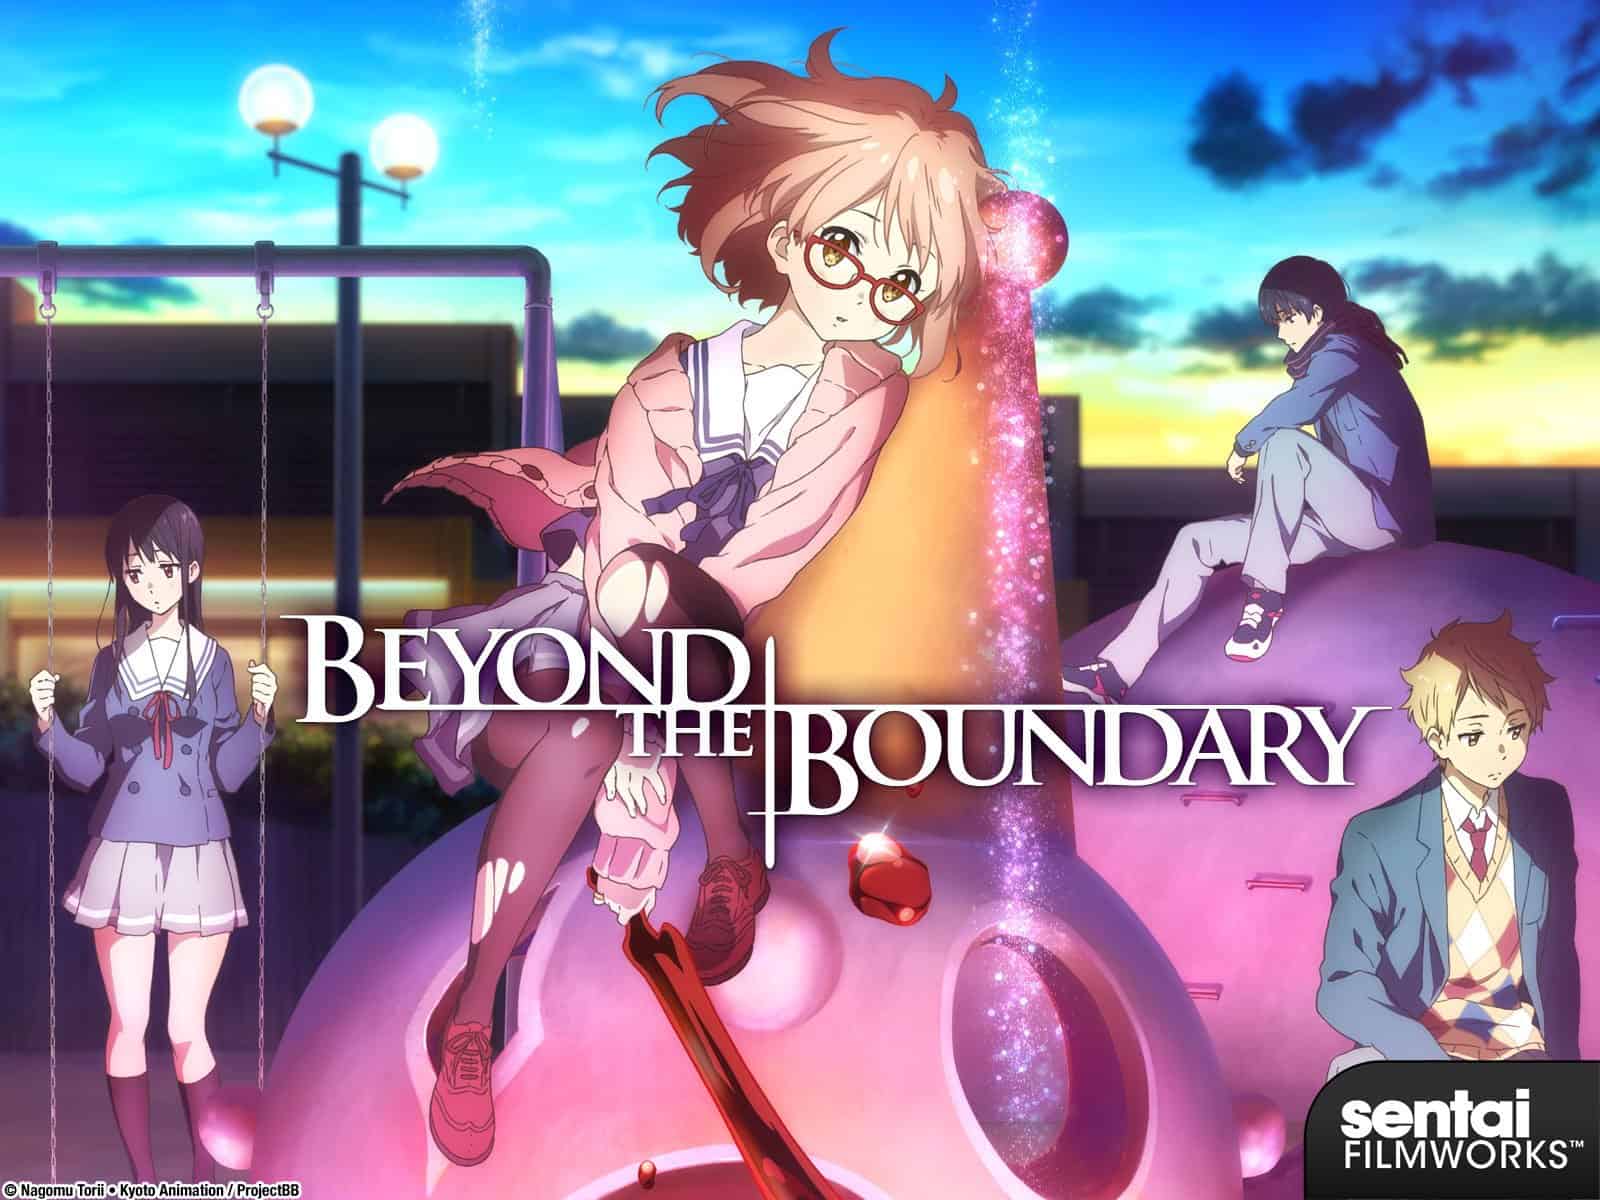 Beyond the Boundary cover art